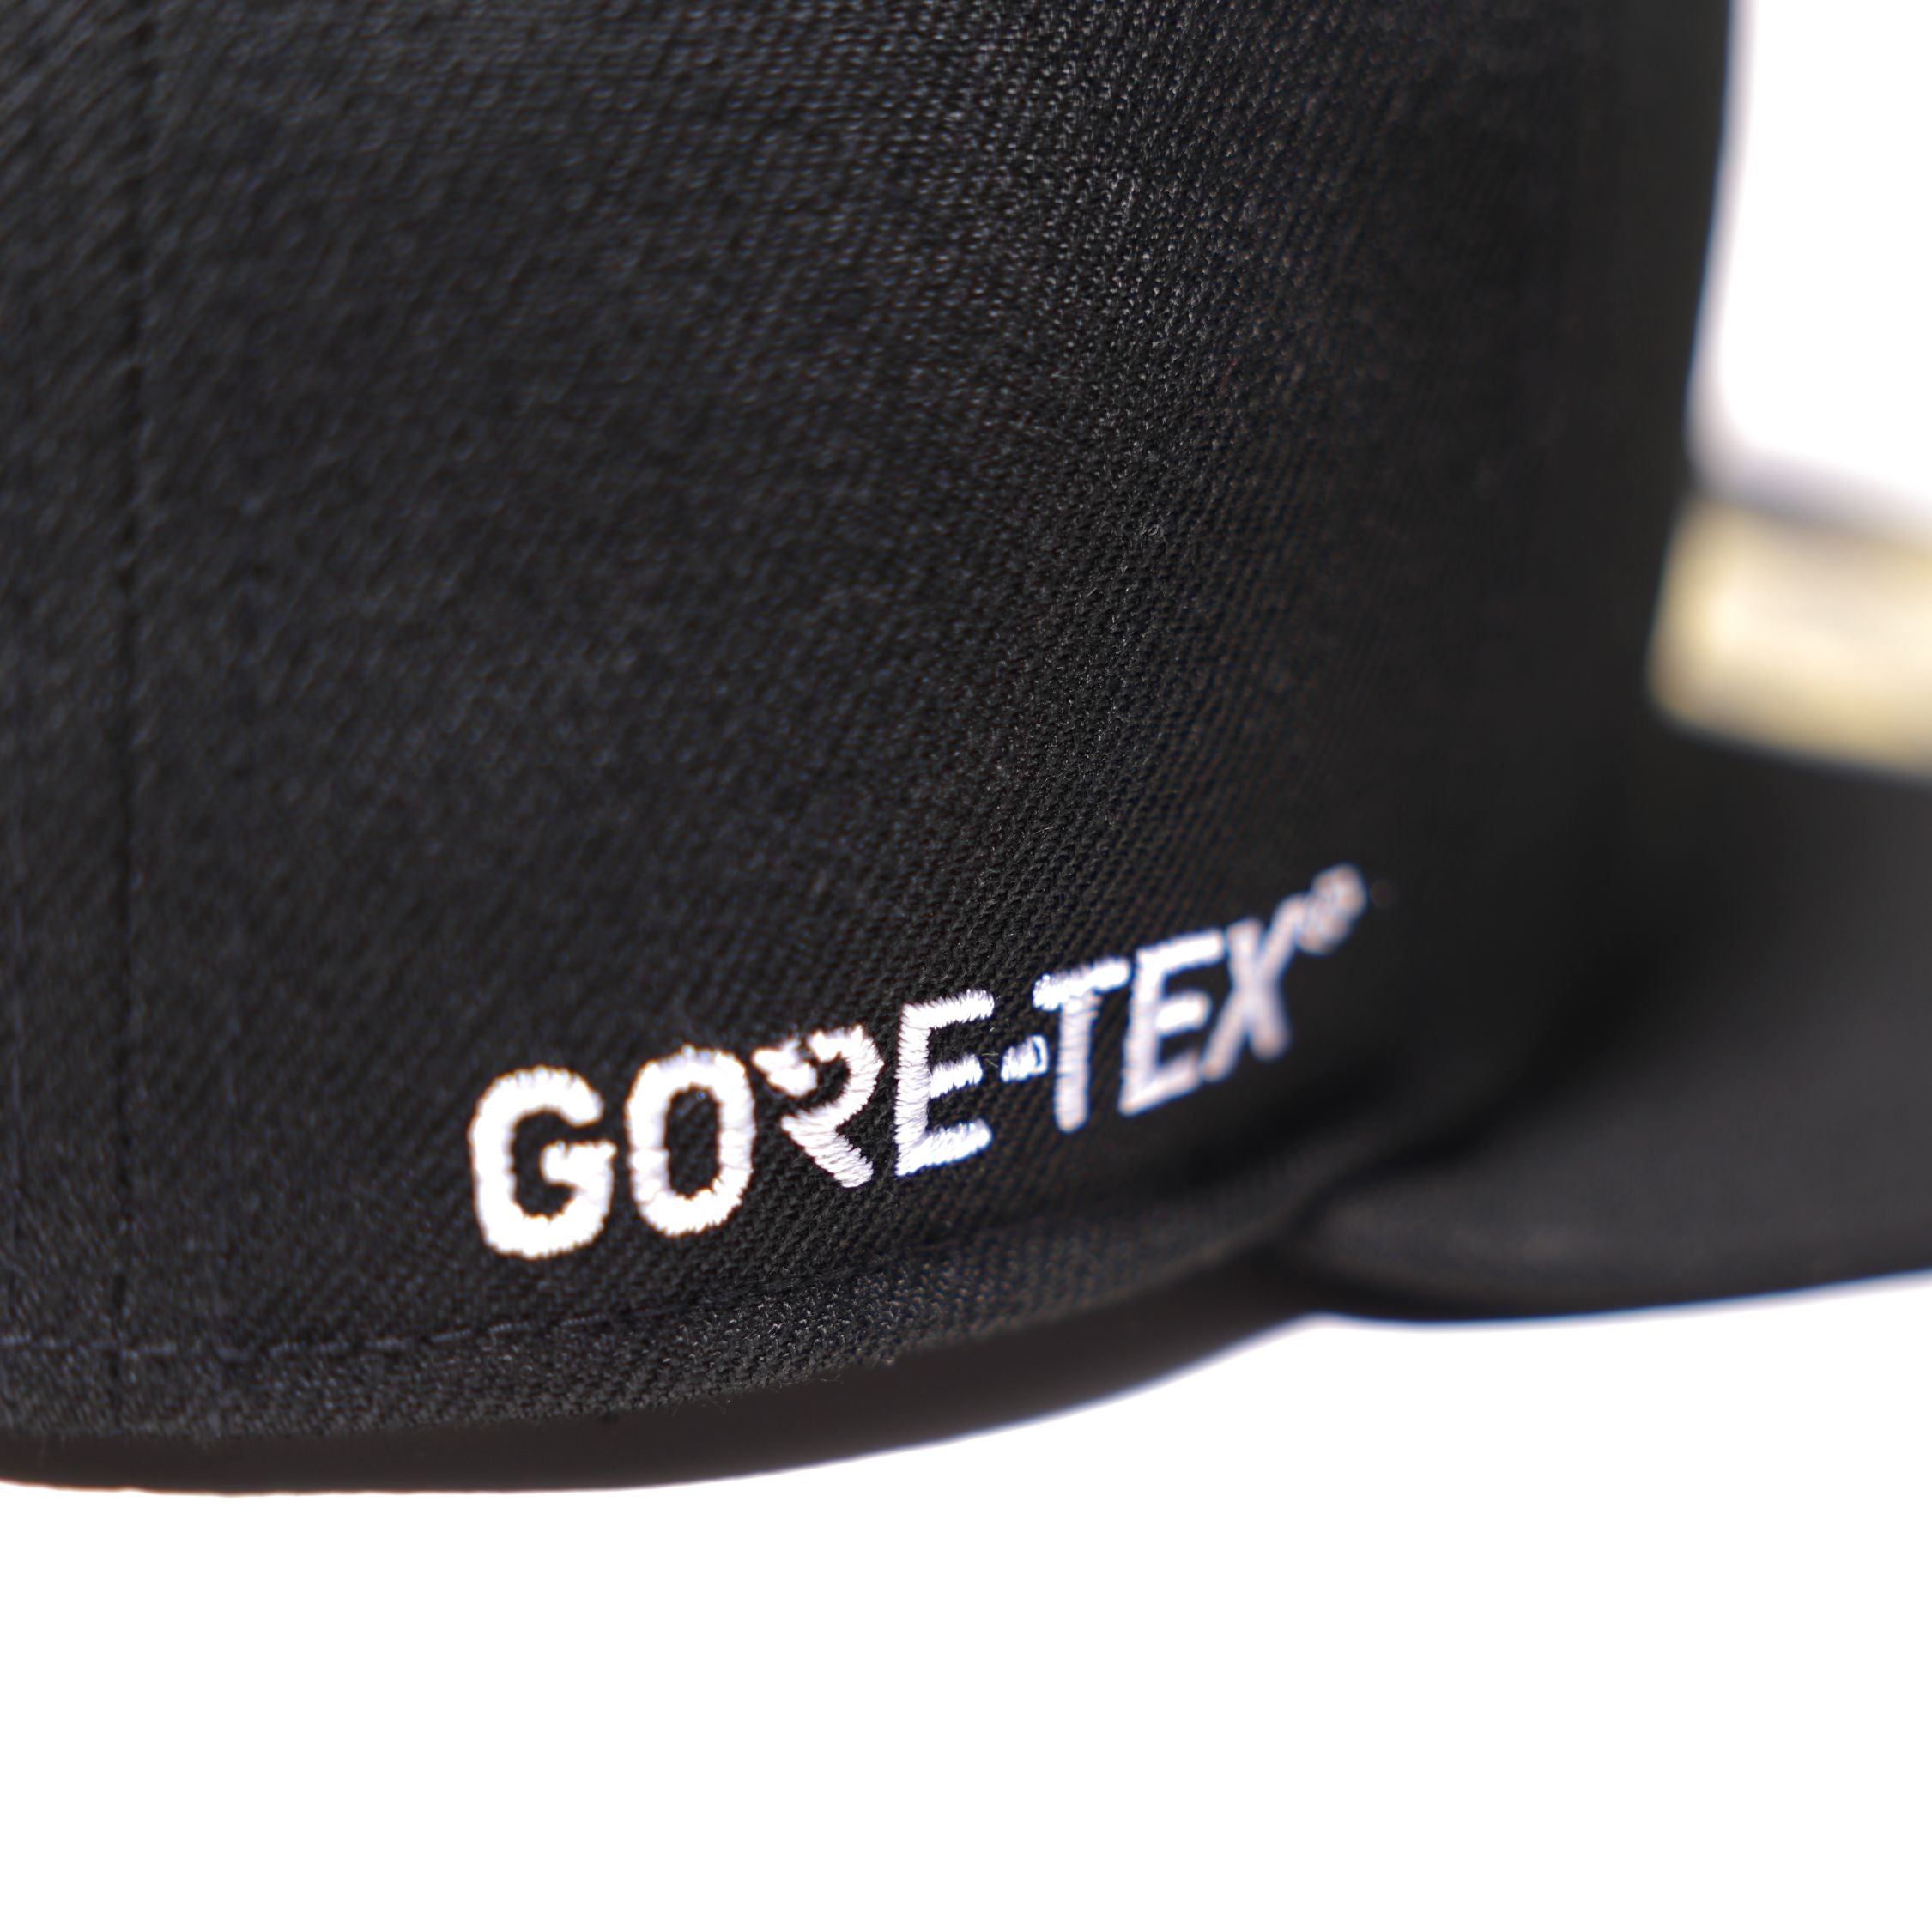 59FIFTY GORE-TEX cap.(Listen To The Soloist.) - snwa.0003-black